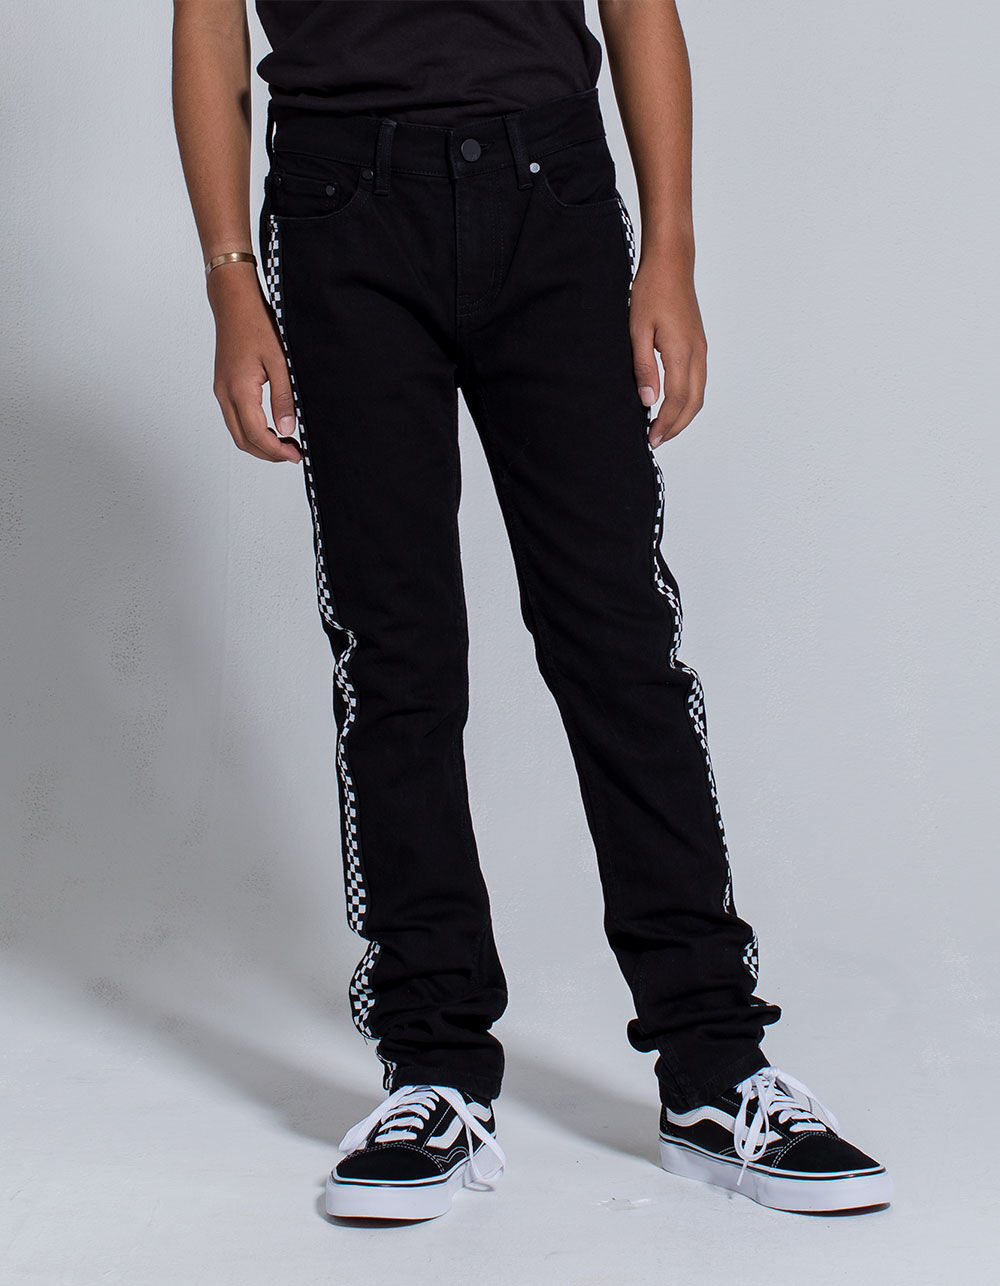 RSQ Tokyo Super Skinny Checker Boys Jeans image number 2